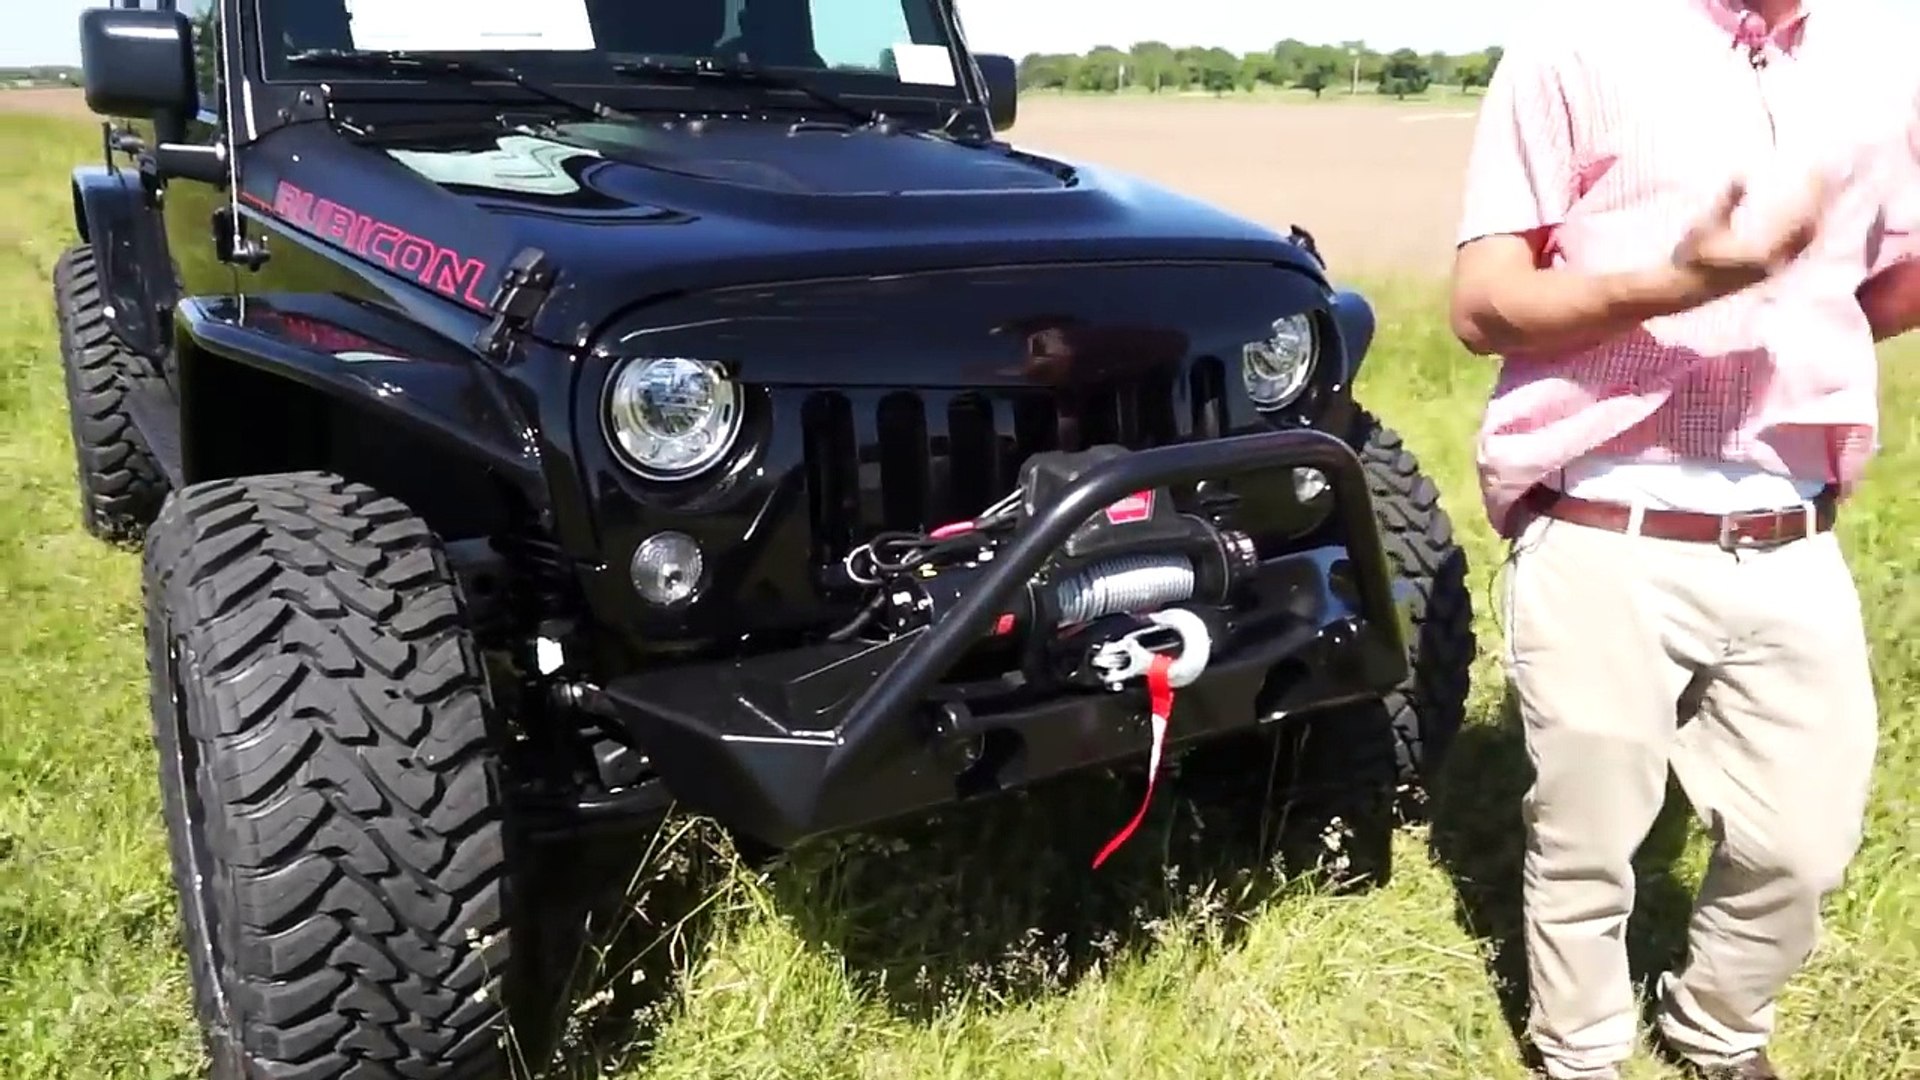 35 TIRES, NO LIFT! 2017 Wrangler Rubicon RECON! Our latest has 20 Fuel  Wheels and lots more! - Vidéo Dailymotion